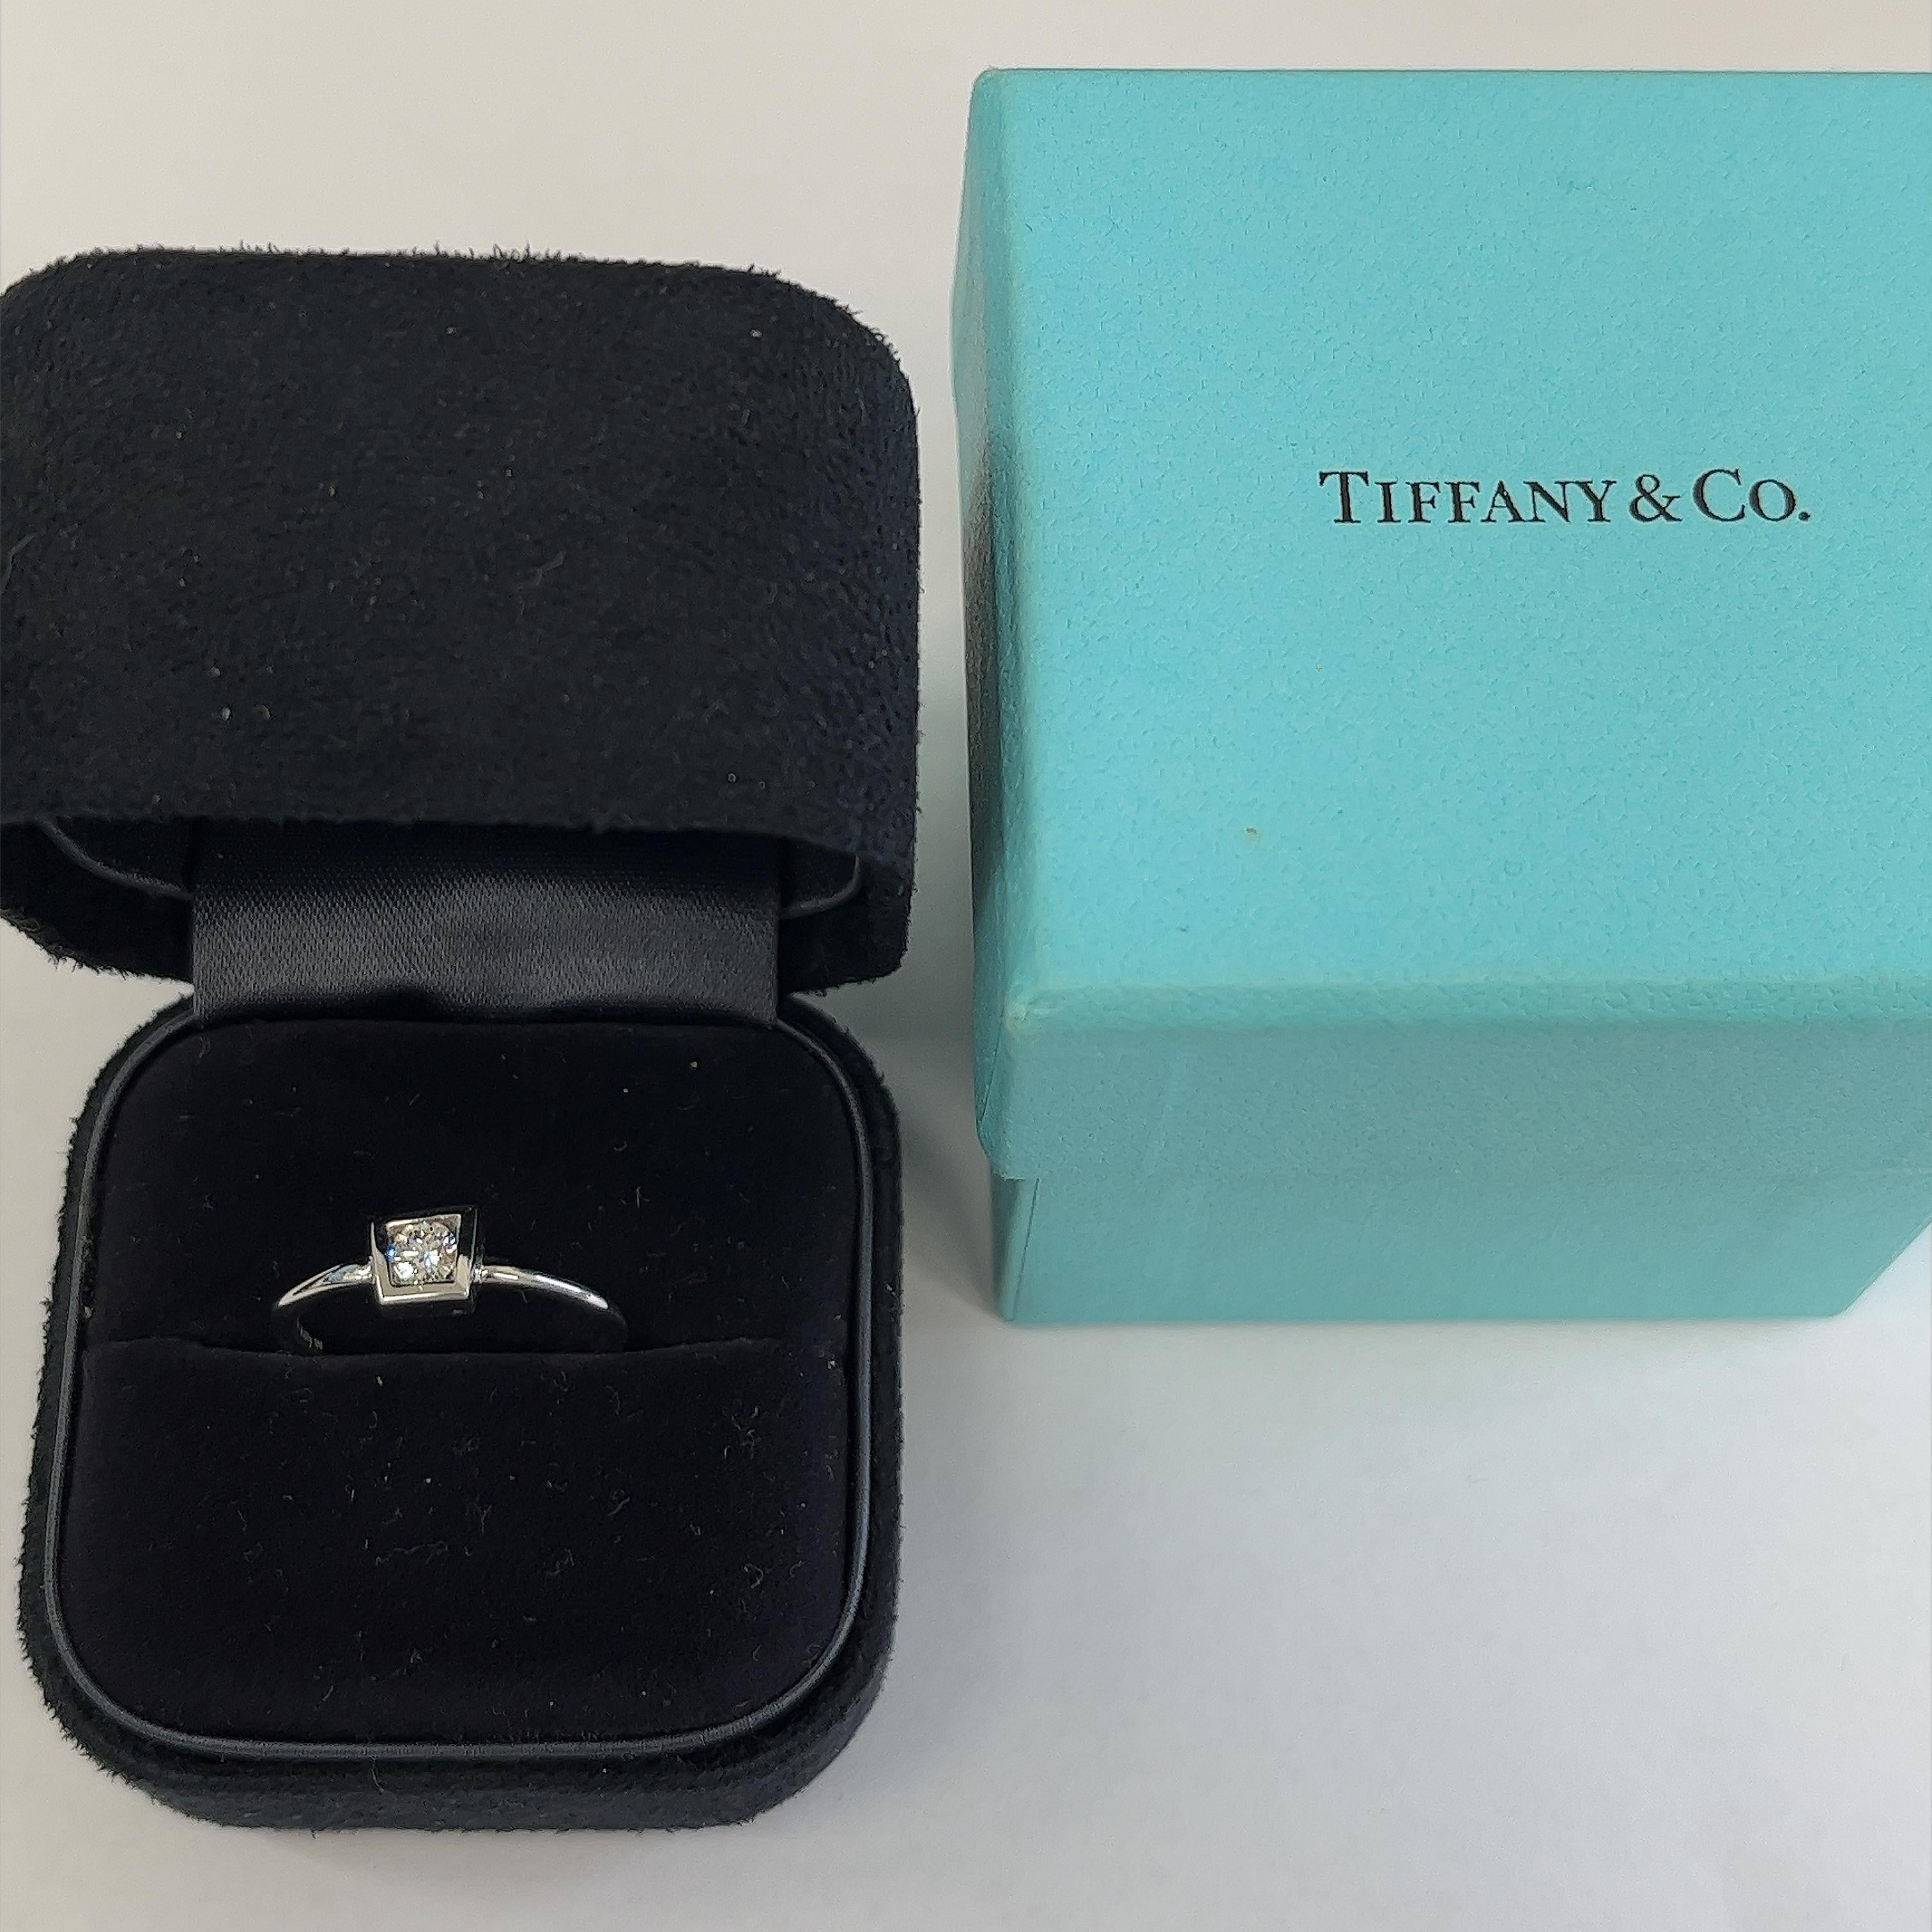 Tiffany & Co. Frank Gehry Solitaire Ring in 18ct White Gold with 0.15ct diamond 1